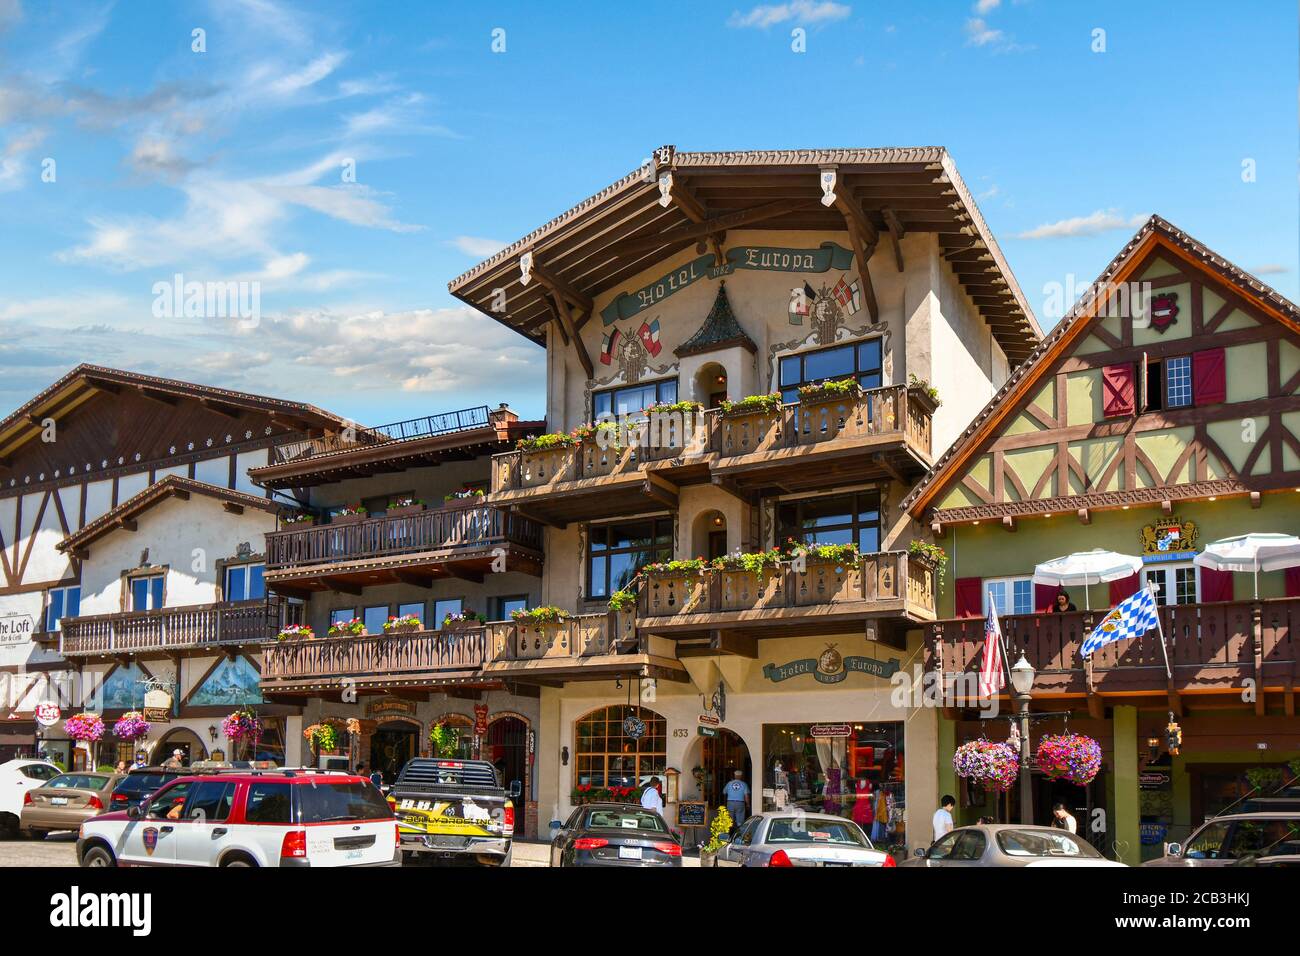 Picturesque buildings and shops in the Bavarian and Scandinavian themed town of Leavenworth, Washington State, USA Stock Photo